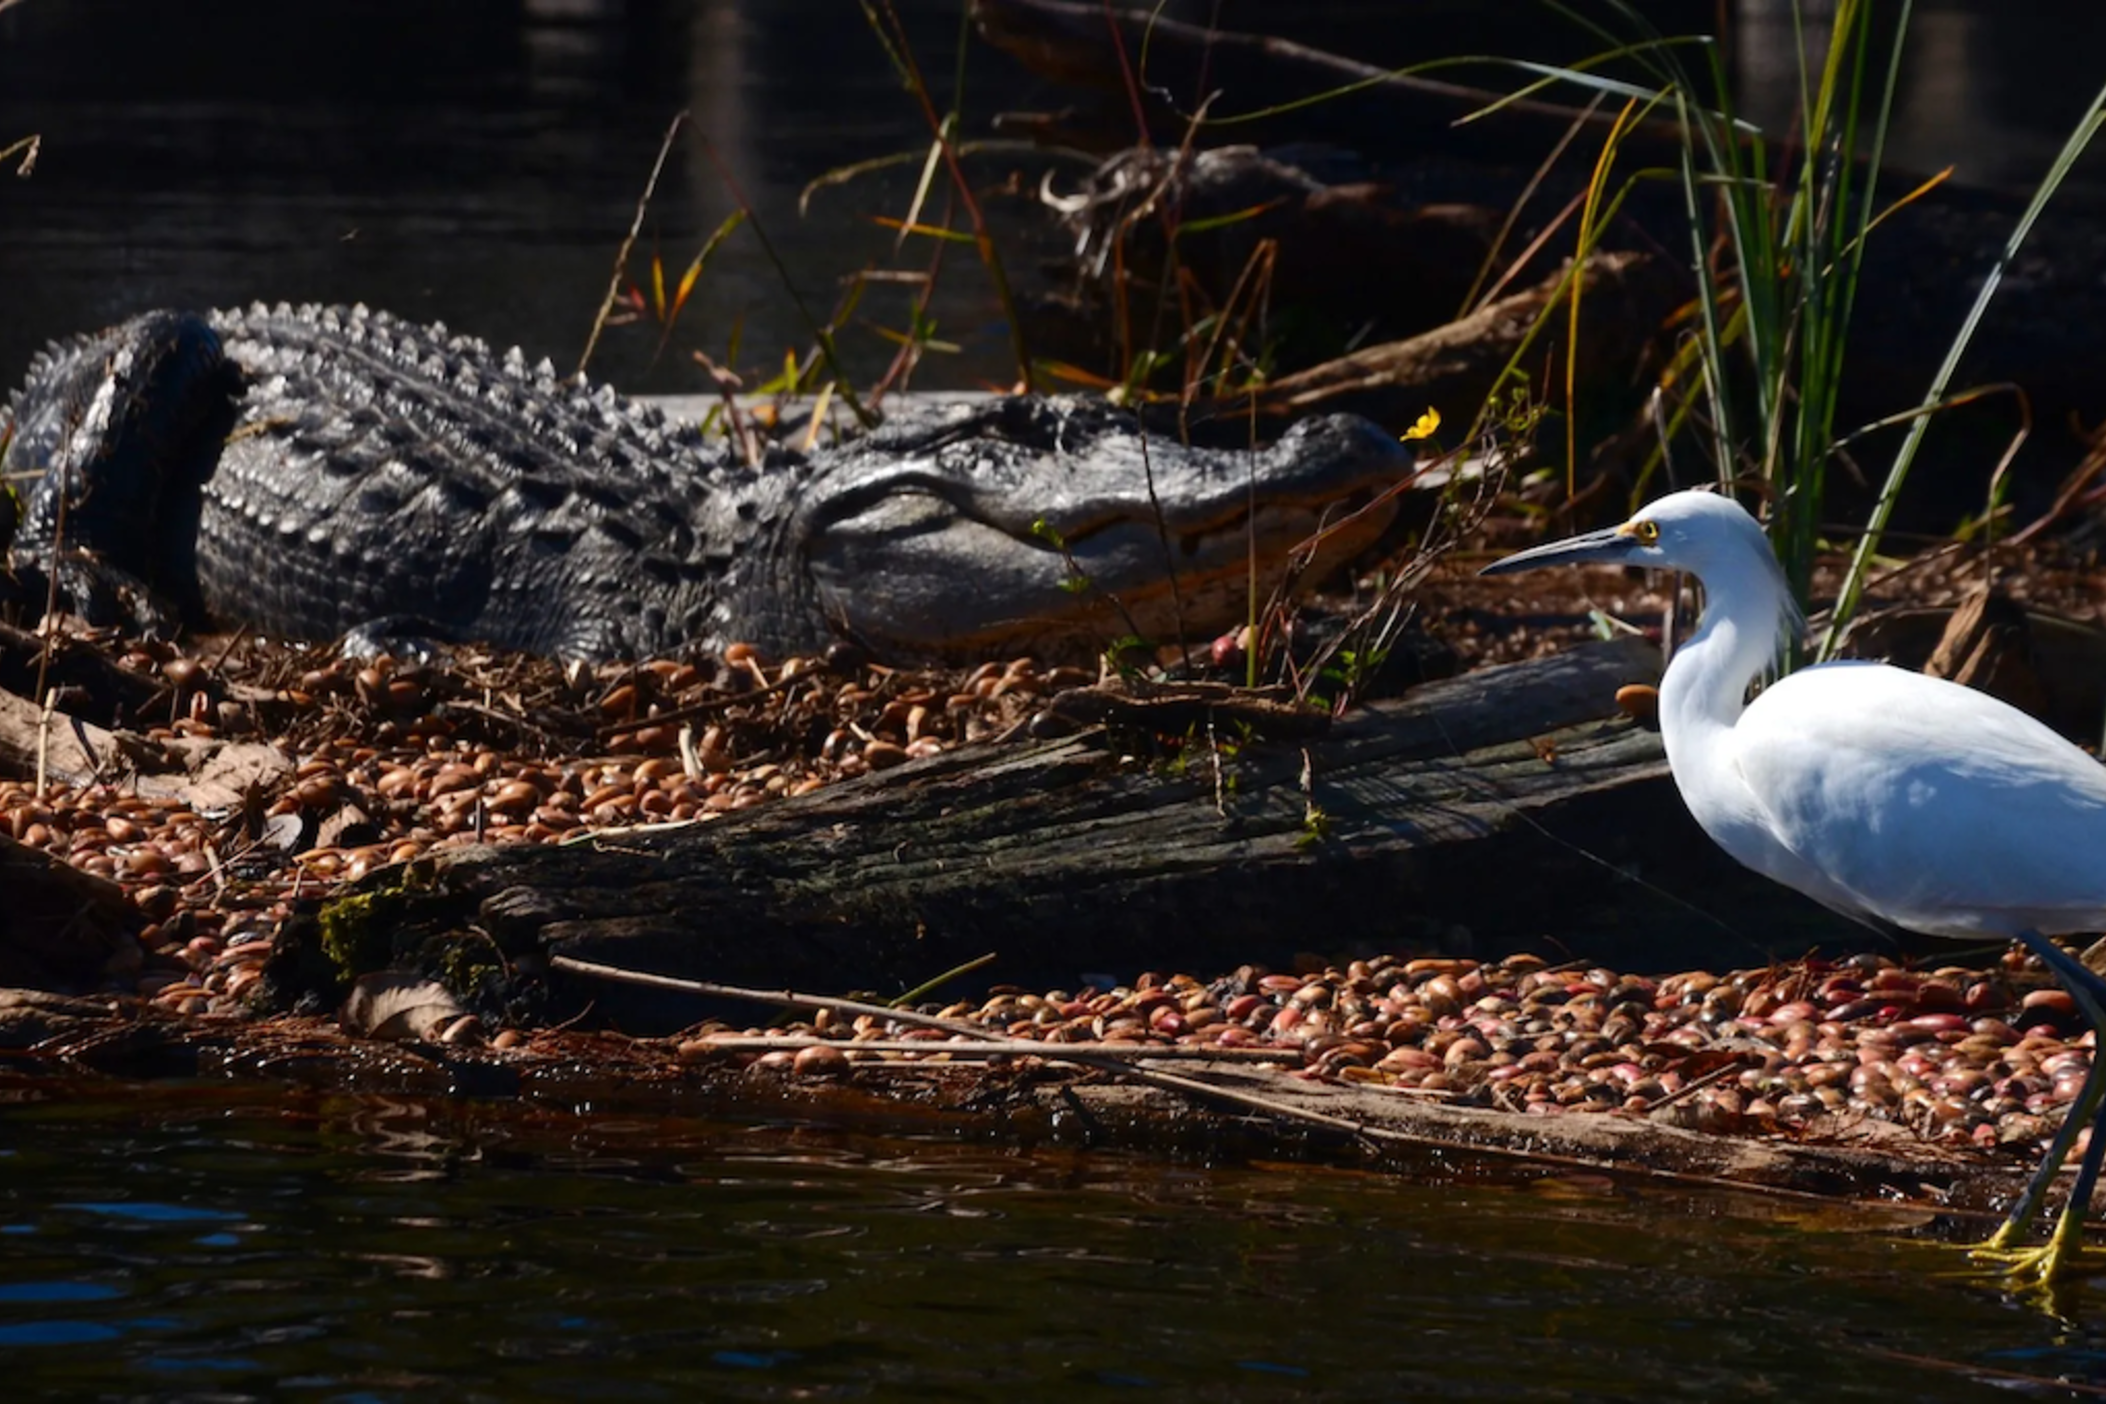 The Okefenokee Swamp is among Georgia's wildest places. It is home to some 200 species of birds and 50 reptiles, including American alligators and snowy egrets. 